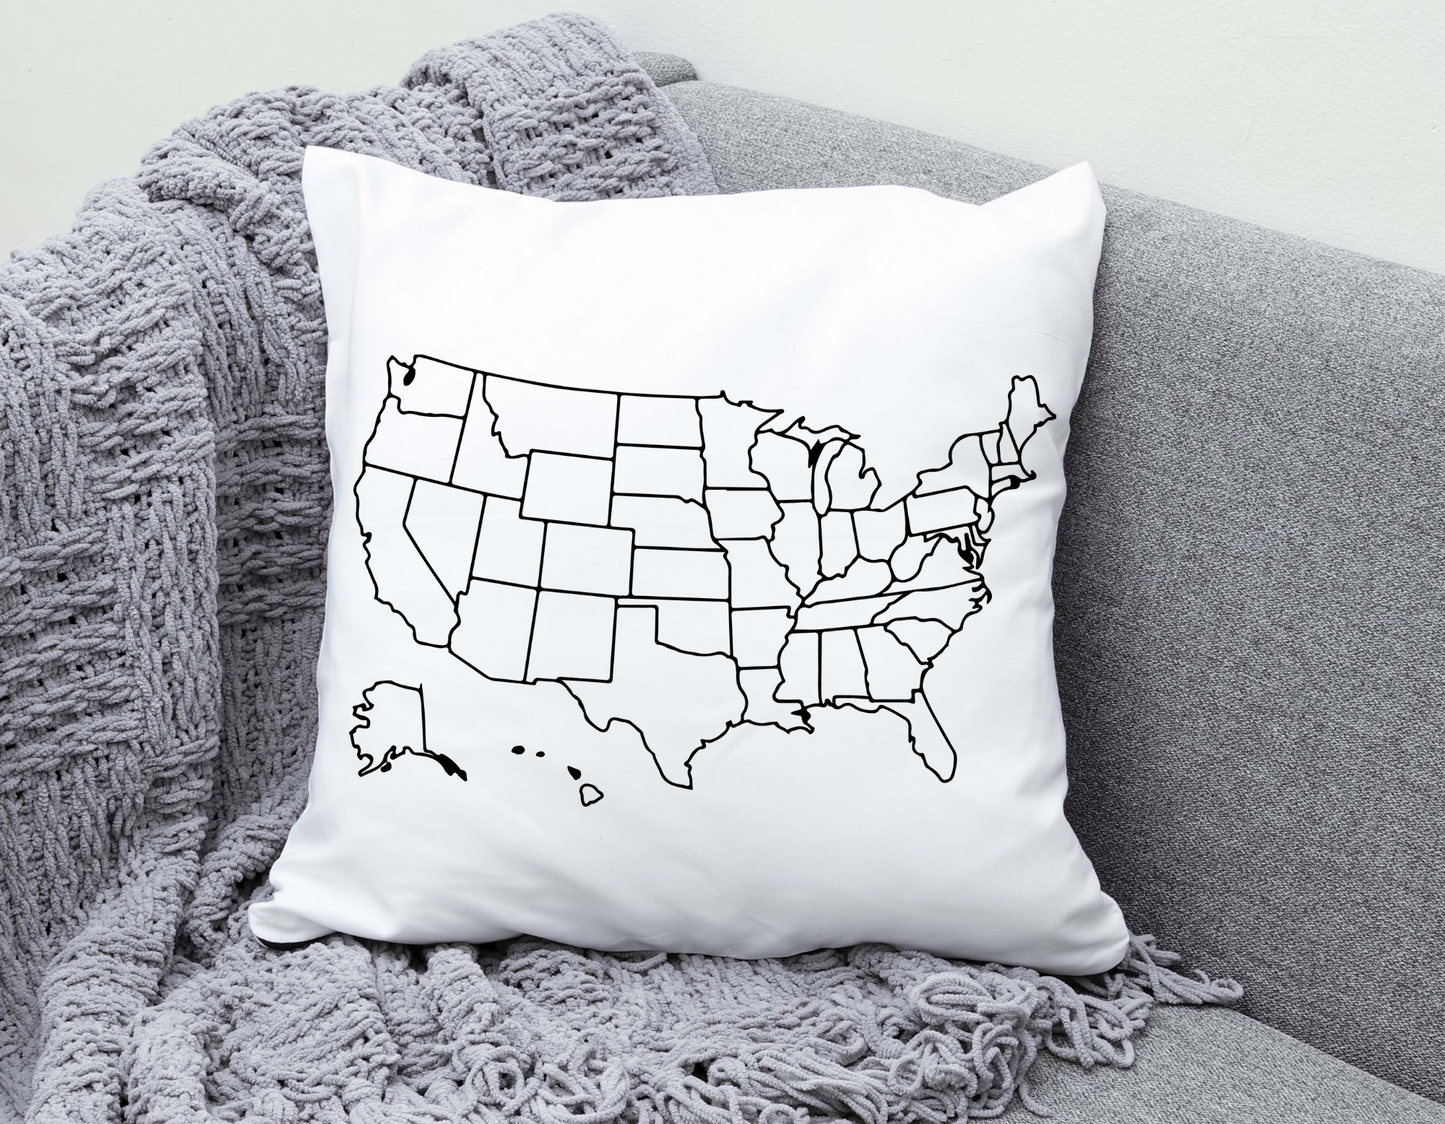 USA Where Have You Been Pillow